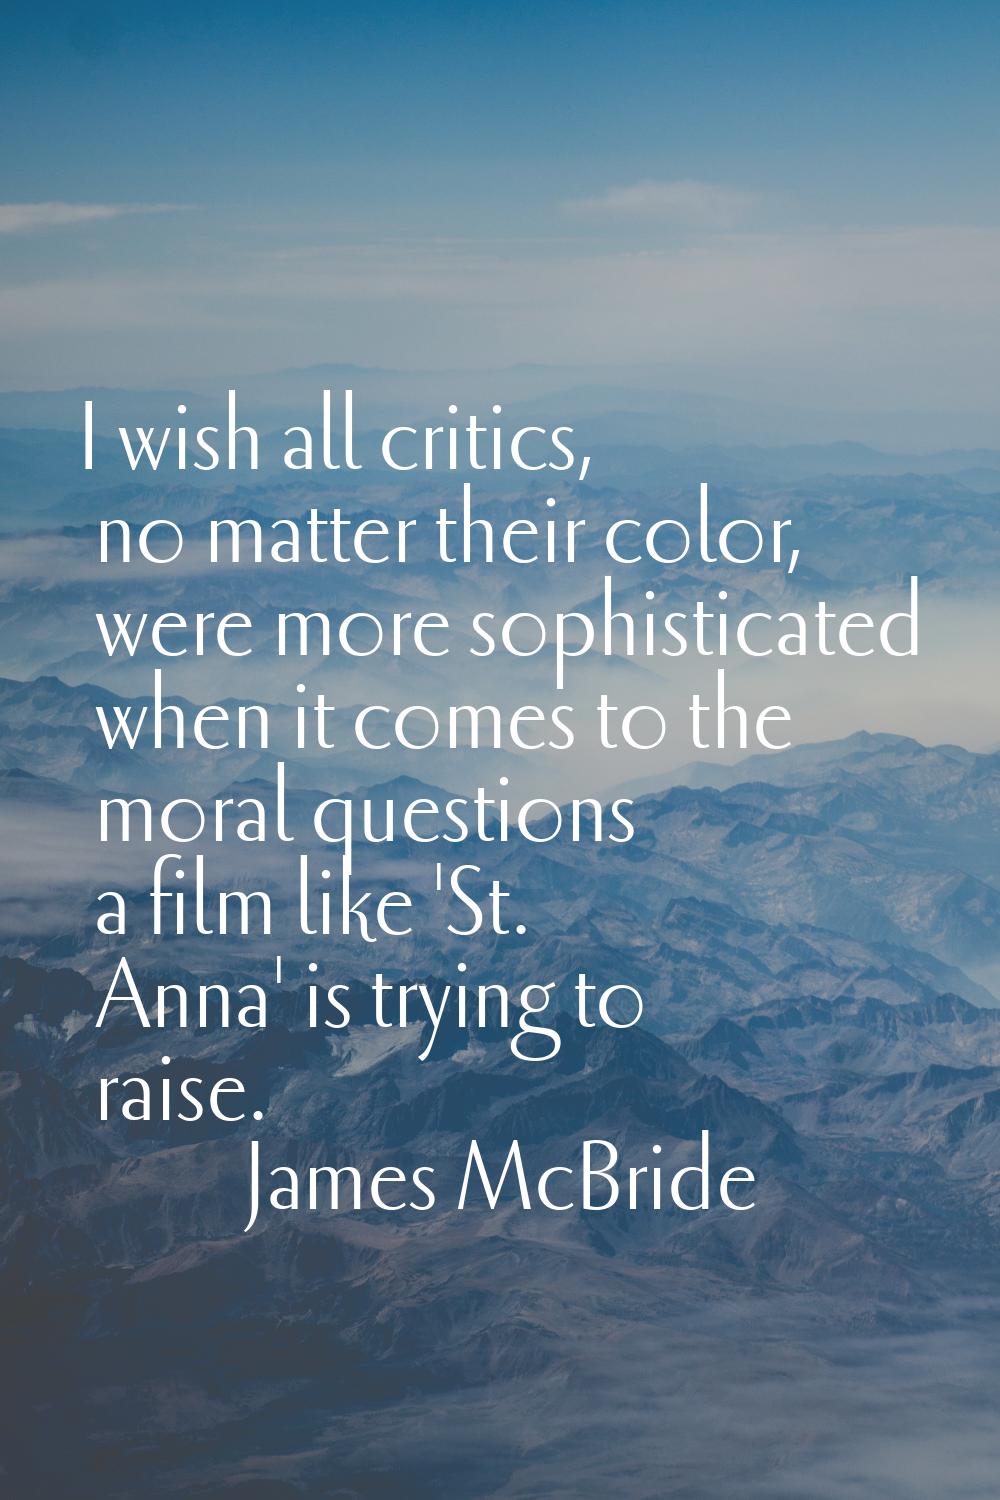 I wish all critics, no matter their color, were more sophisticated when it comes to the moral quest